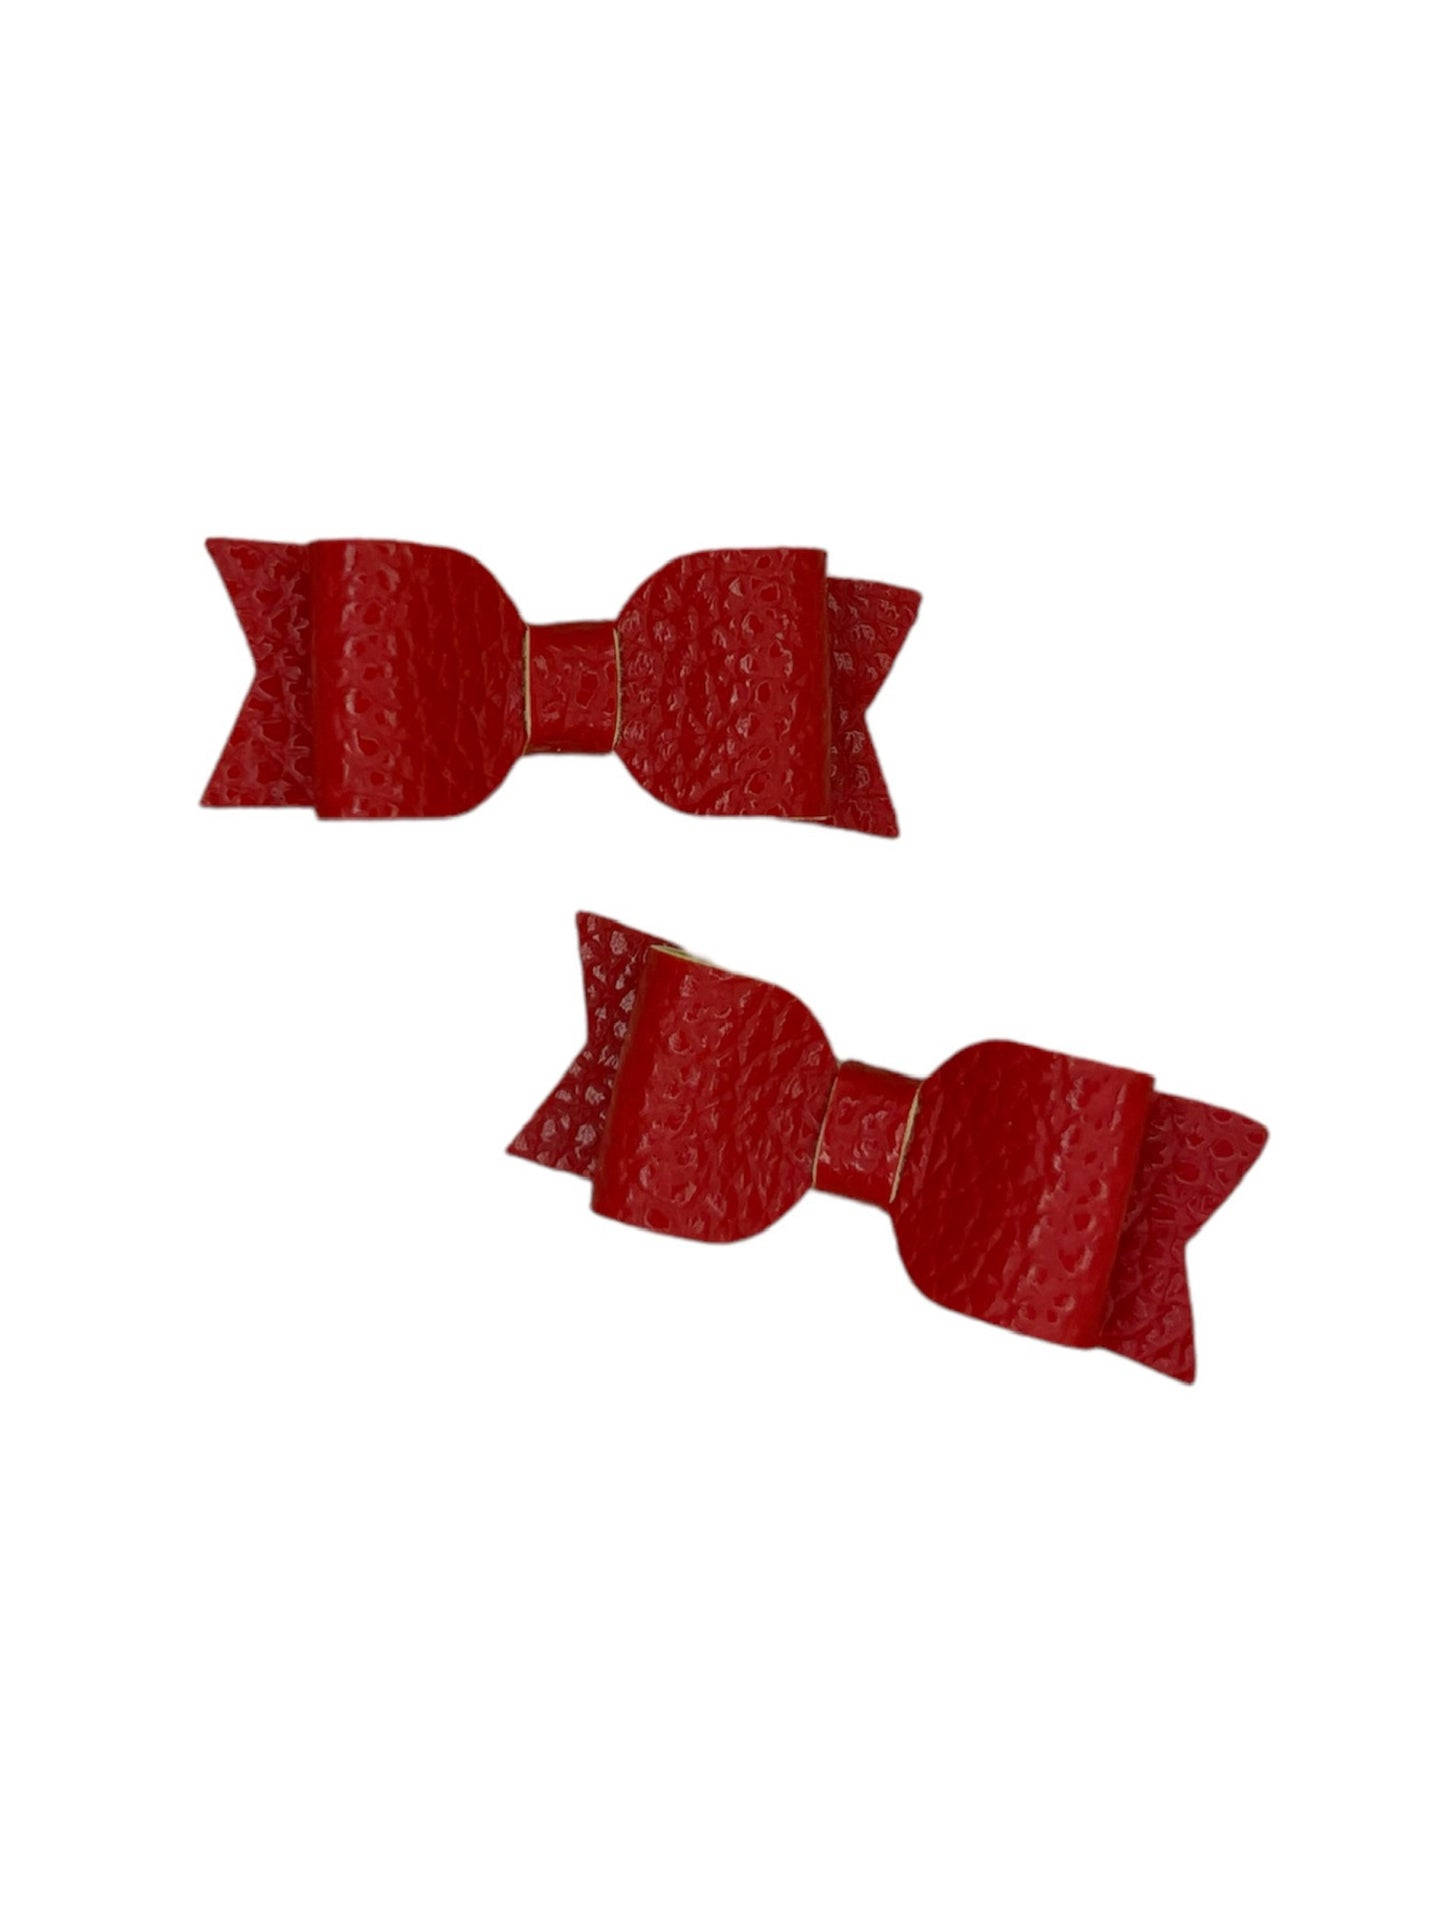 Red Micro Pigtail Bows!